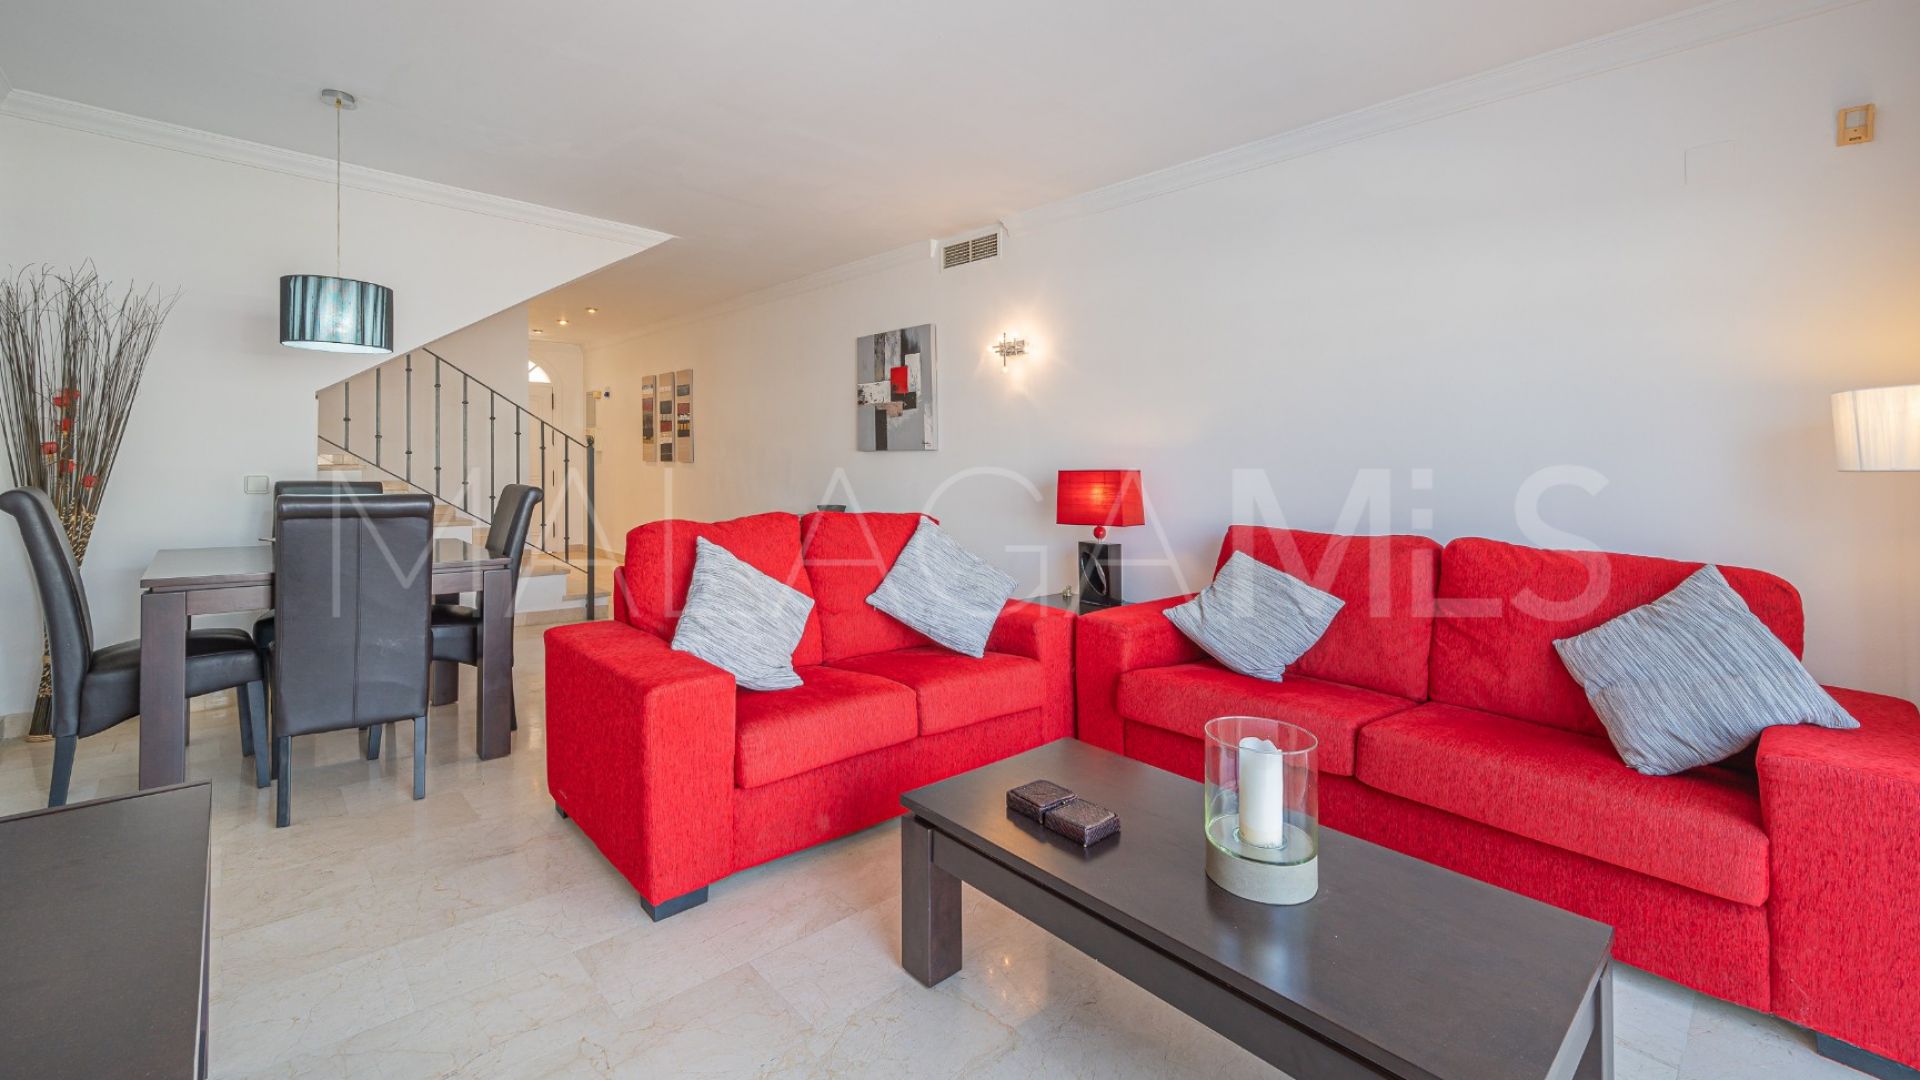 For sale 2 bedrooms duplex penthouse in Aloha Gardens